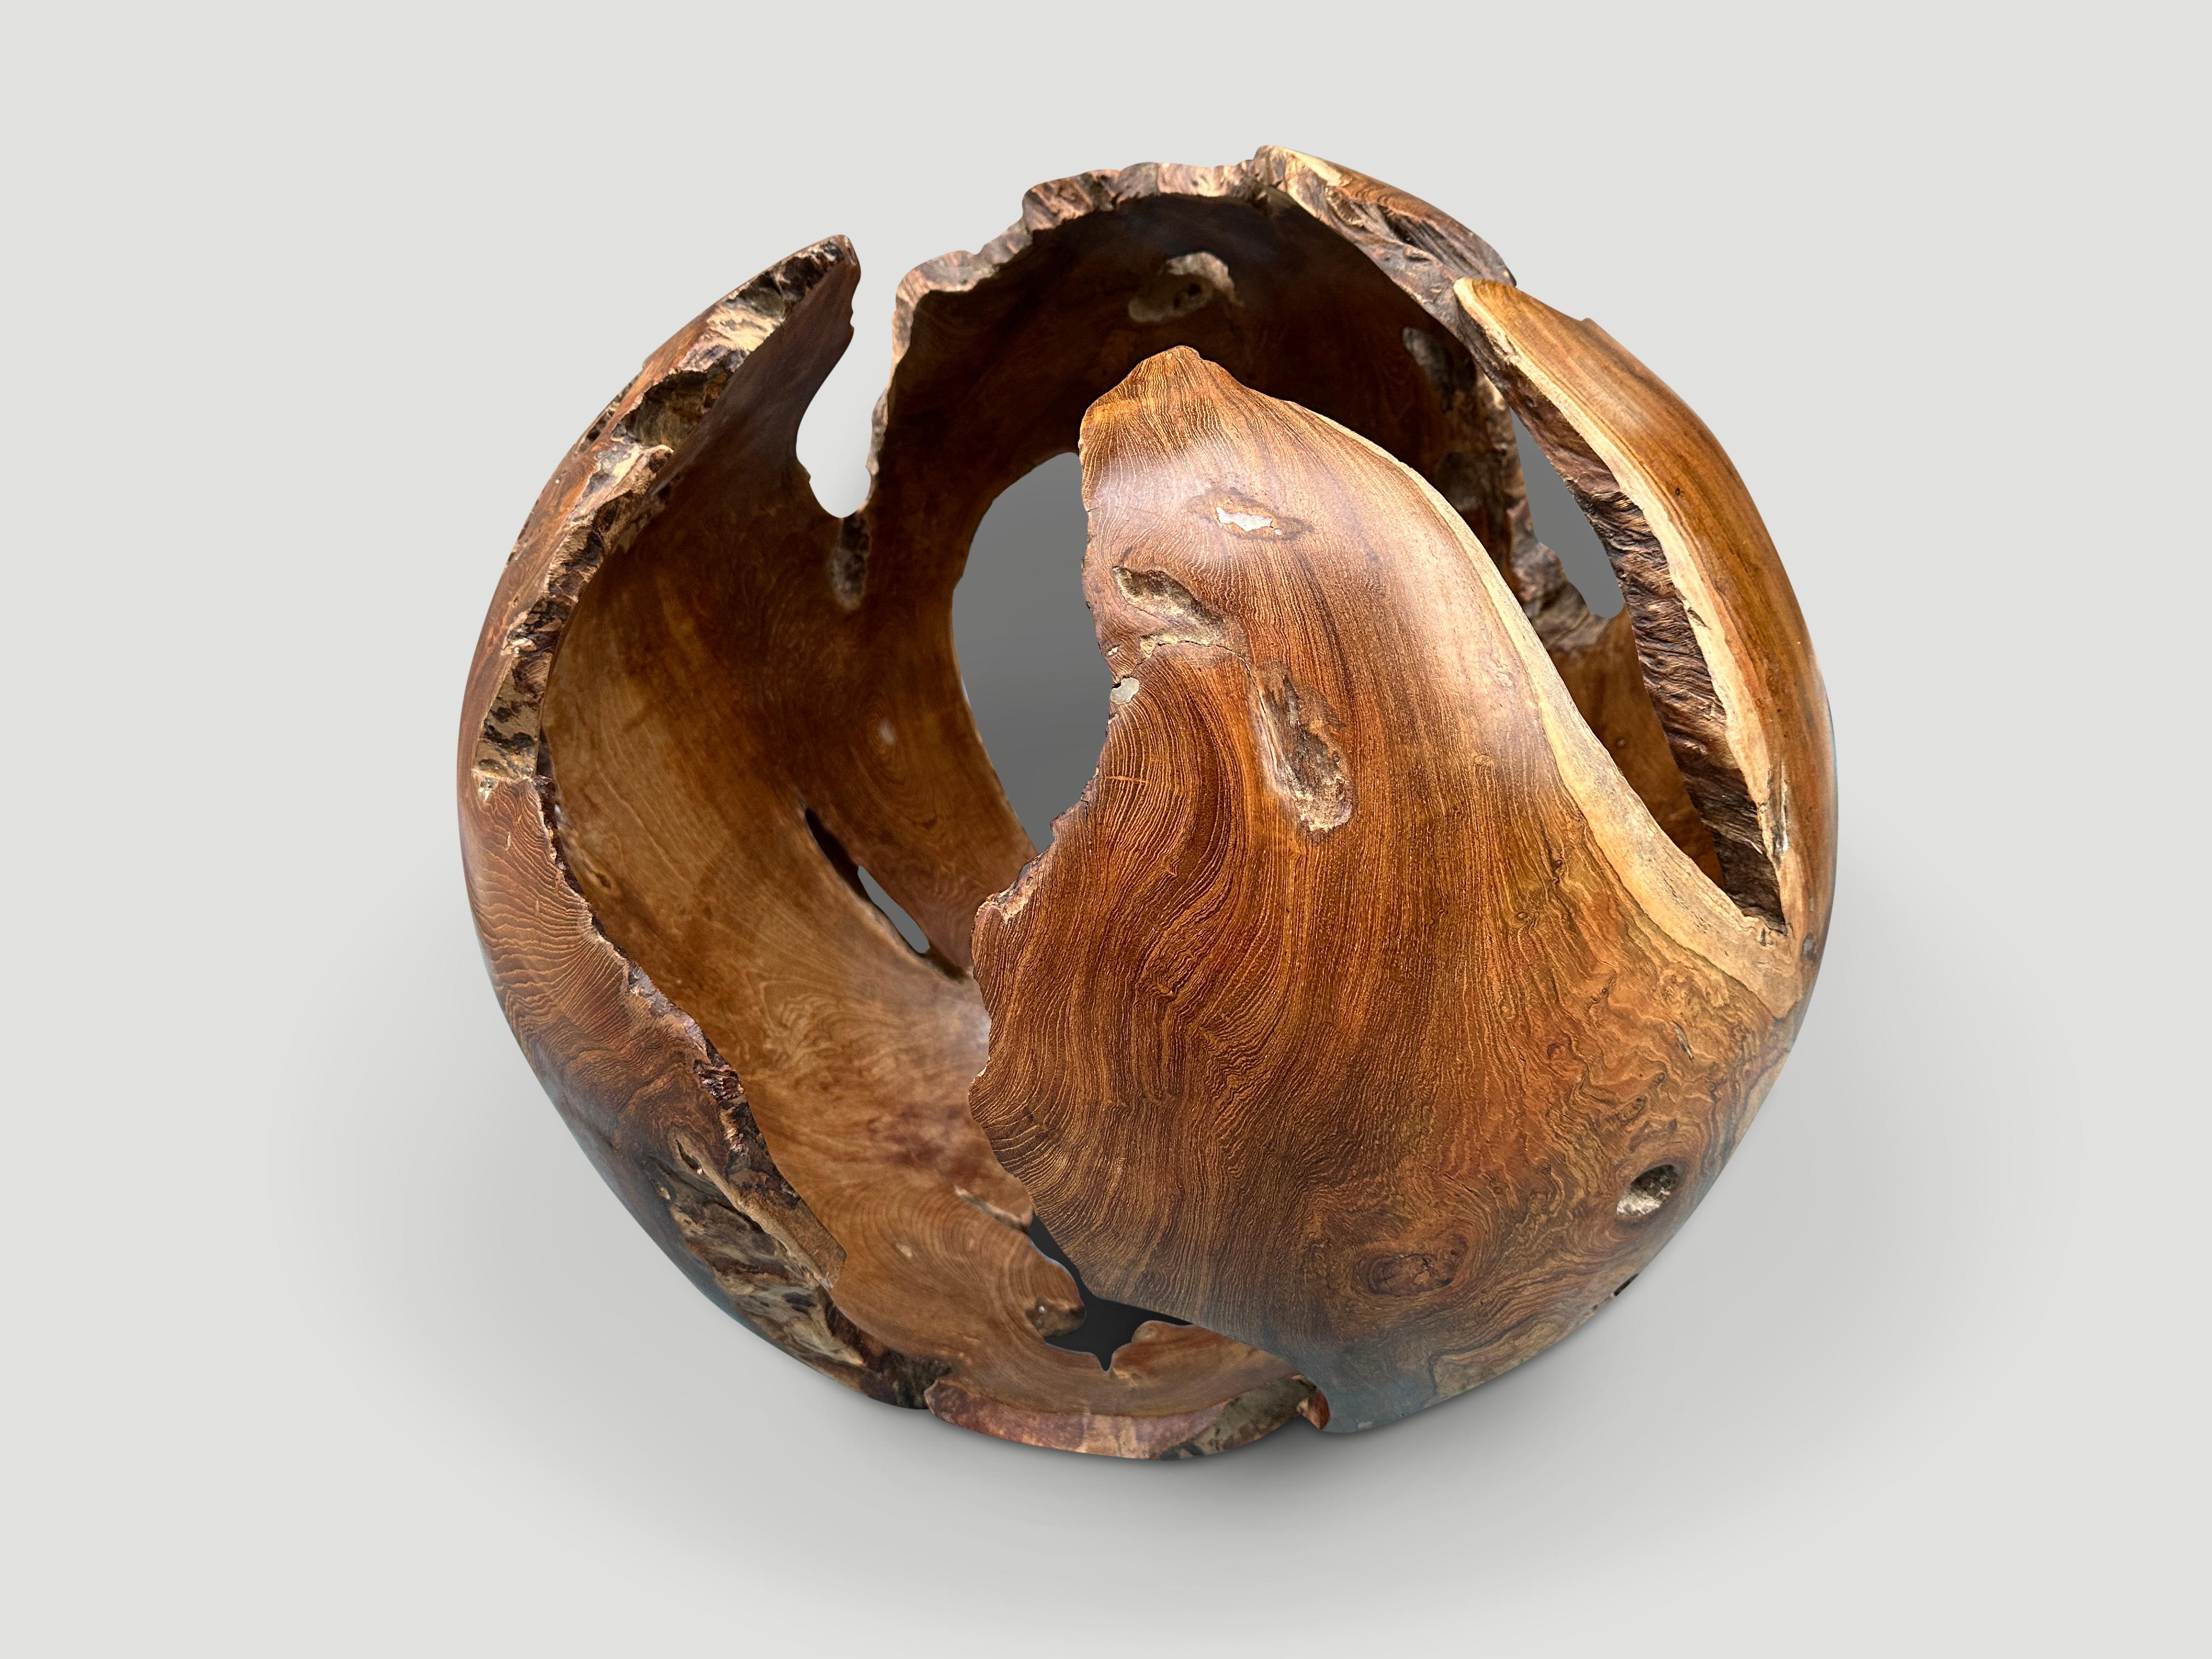 Impressive hollowed out sculptural sphere. Finished with a natural oil revealing the beautiful wood grain. This organic sculpture is stable resting on either side.

This sculpture was hand made in the spirit of Wabi-Sabi, a Japanese philosophy that